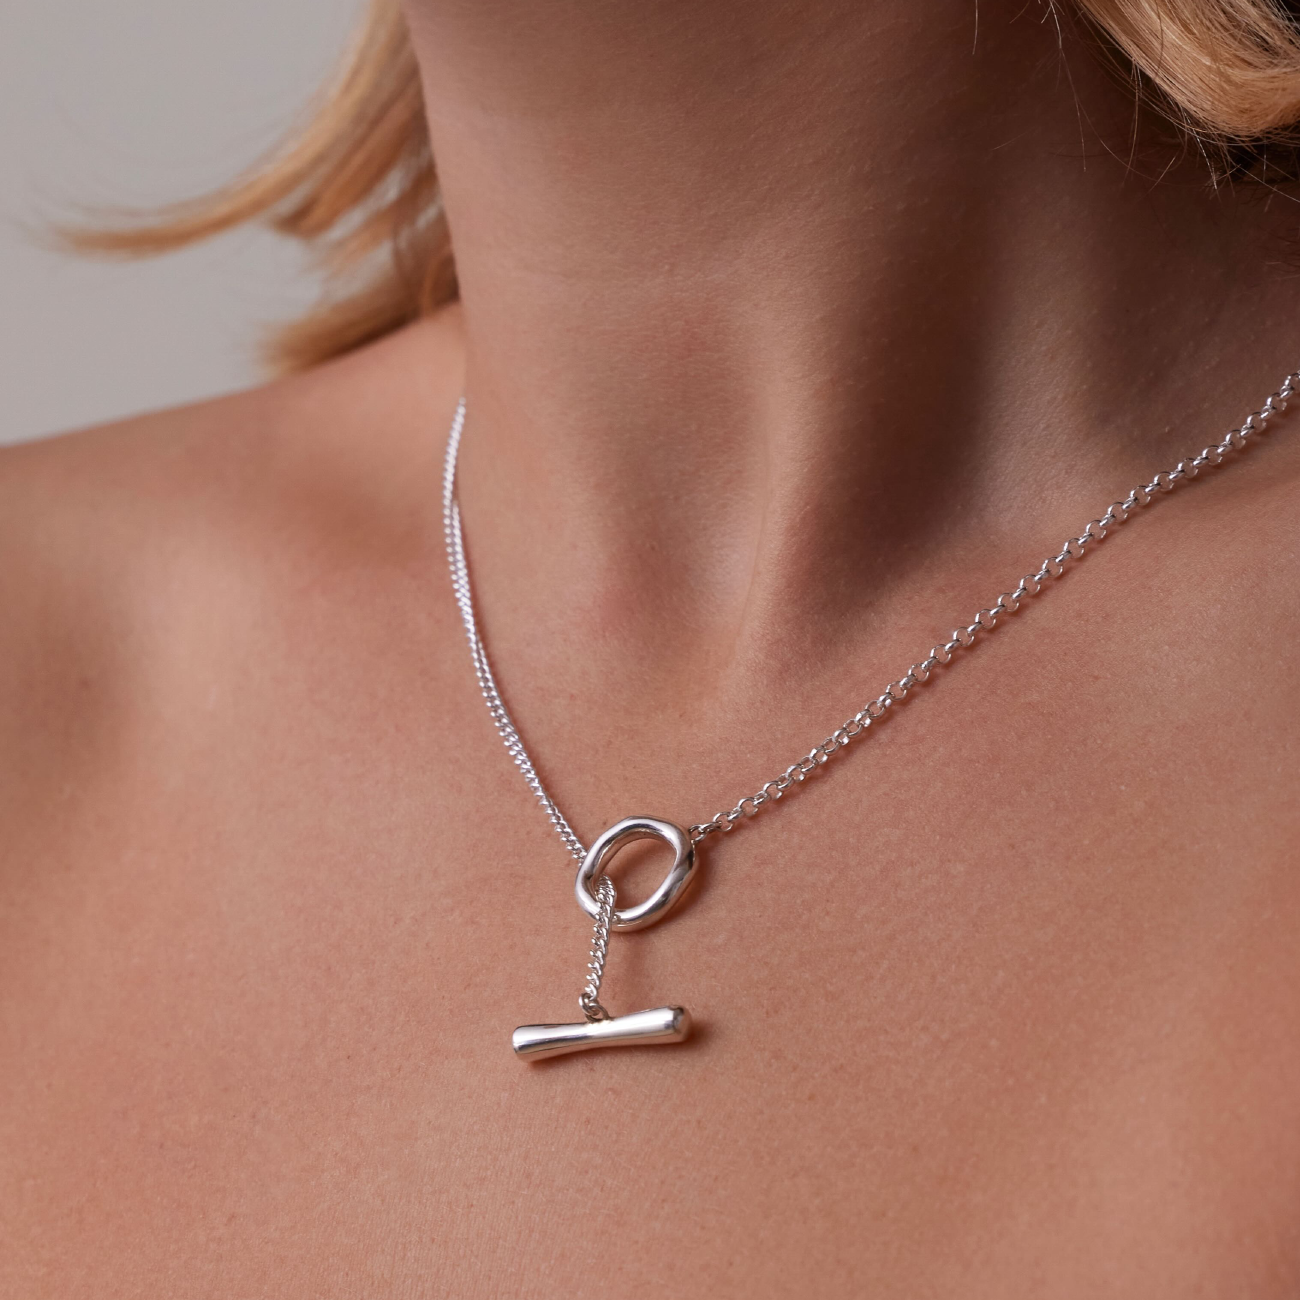 Change Necklace - Silver